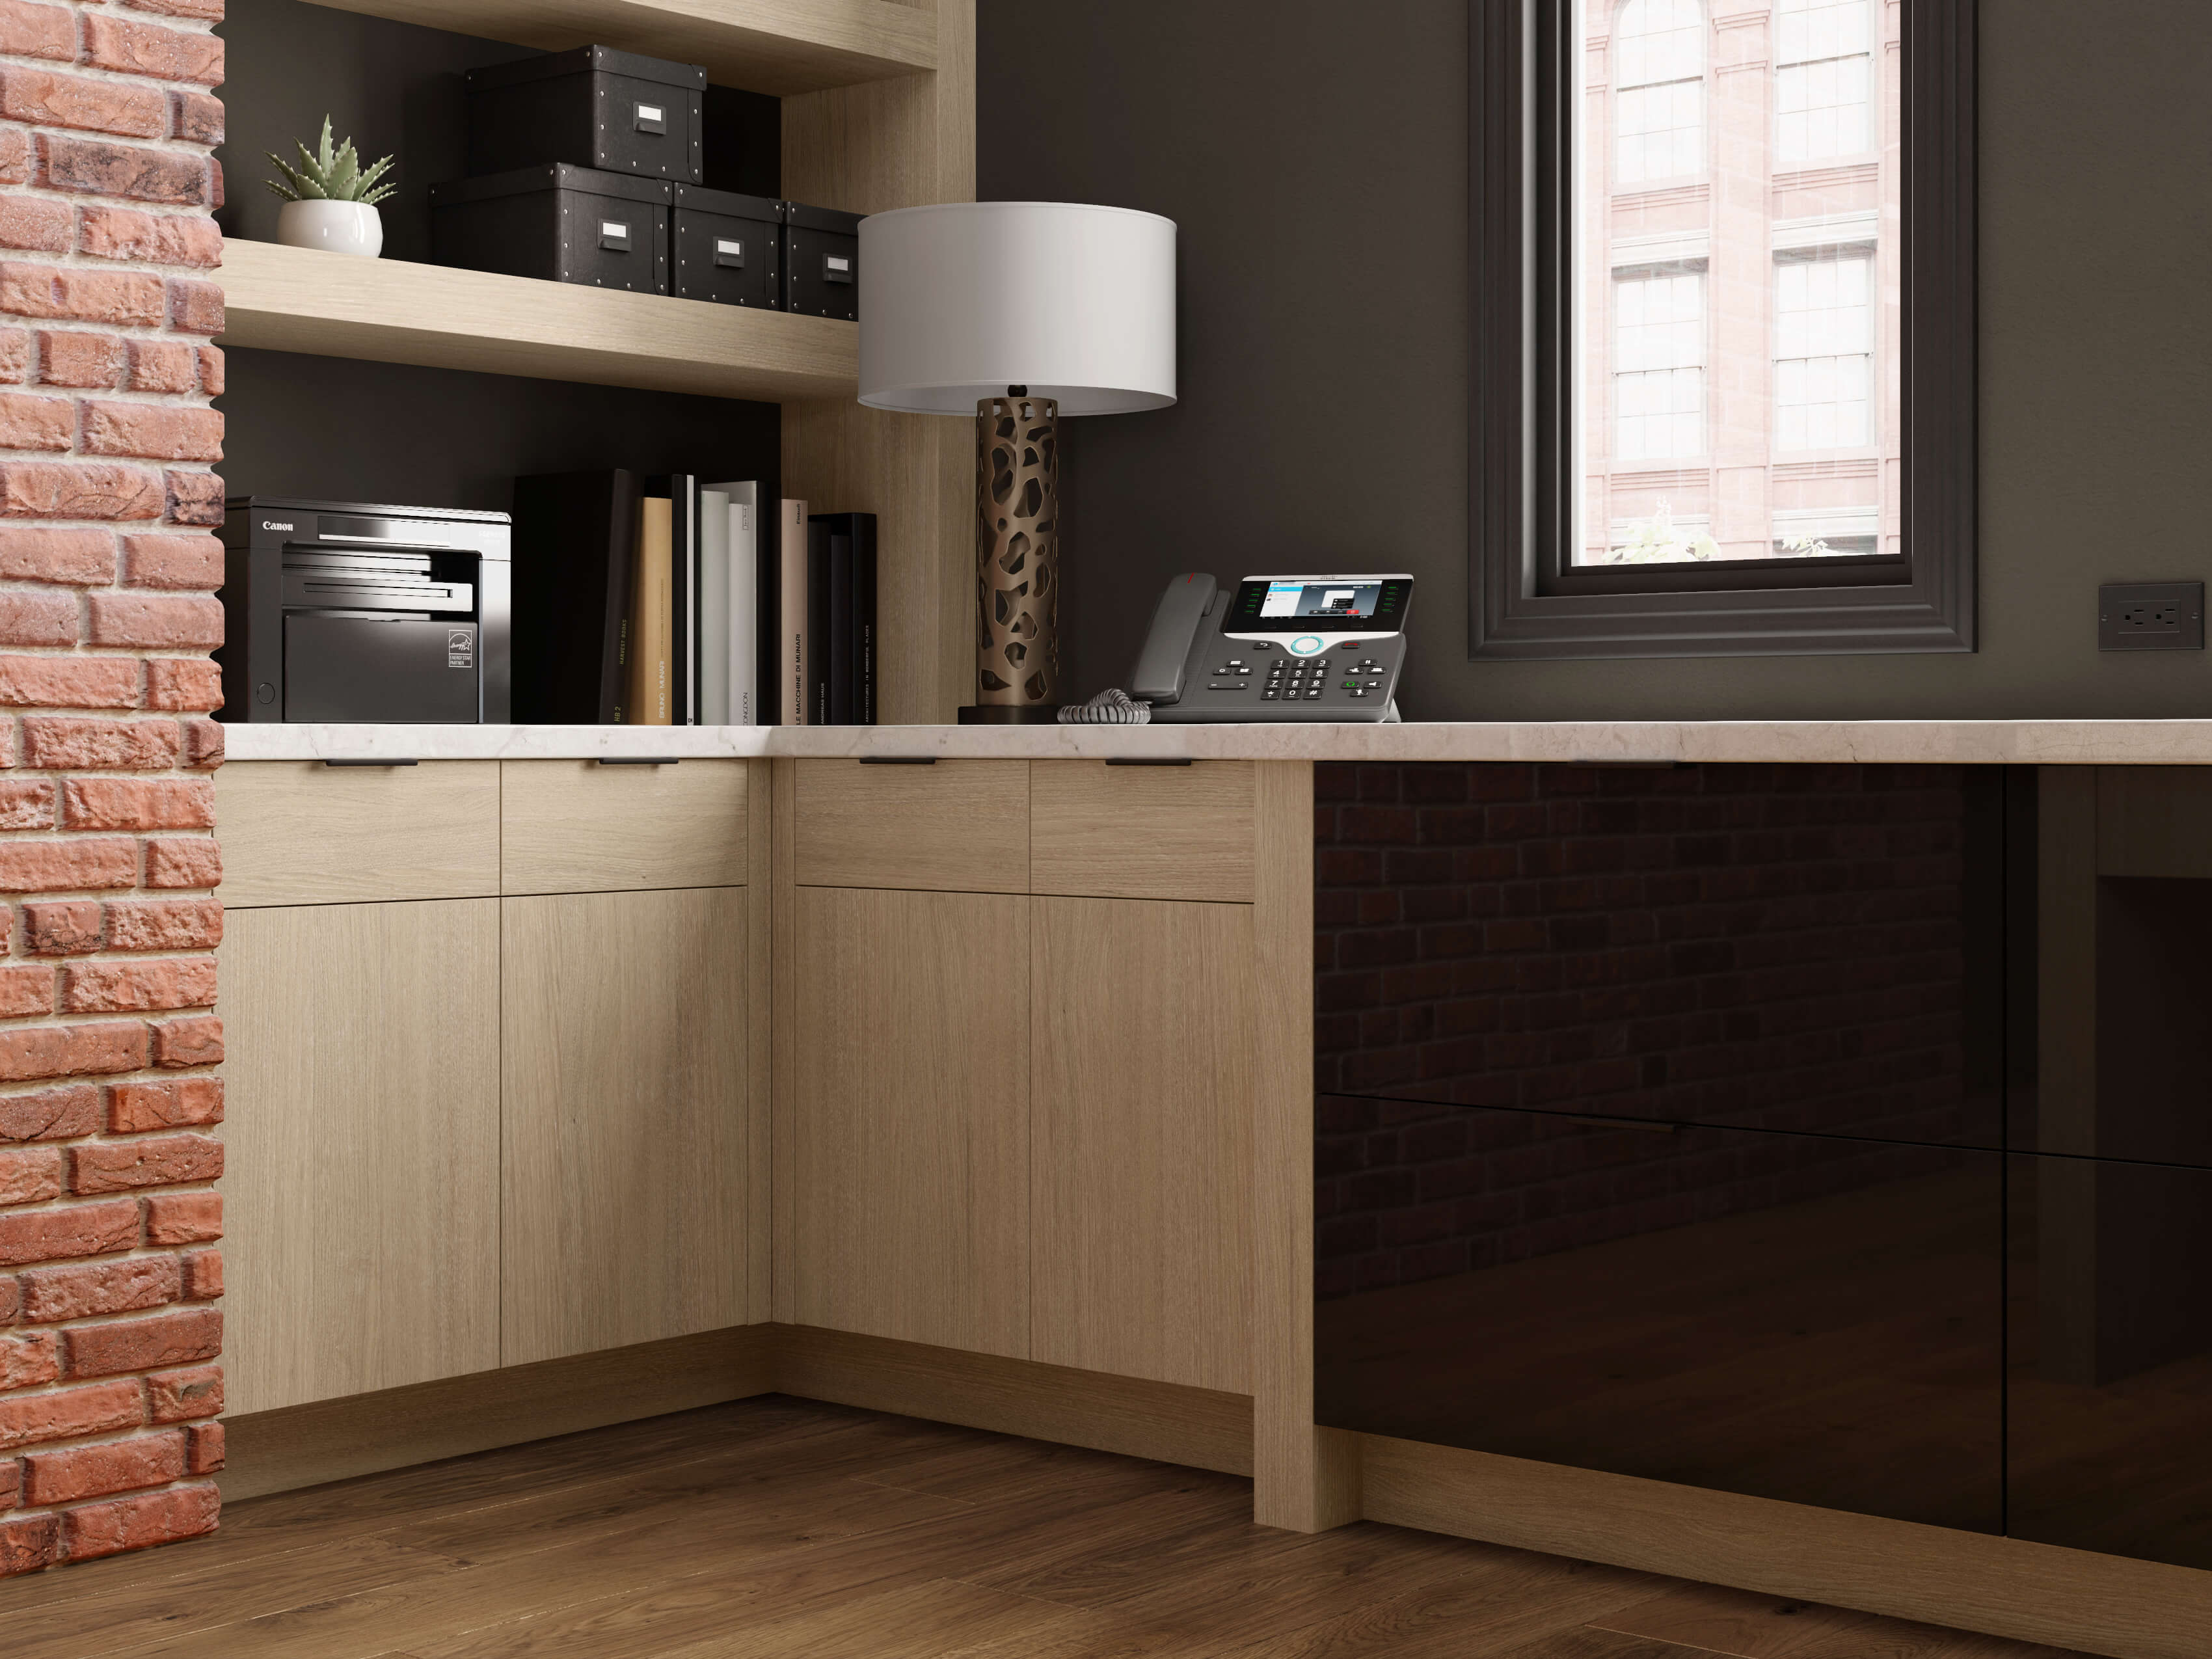 An urban office with a contemporary Quarter-Sawn White Oak cabinets with slab styled doors.